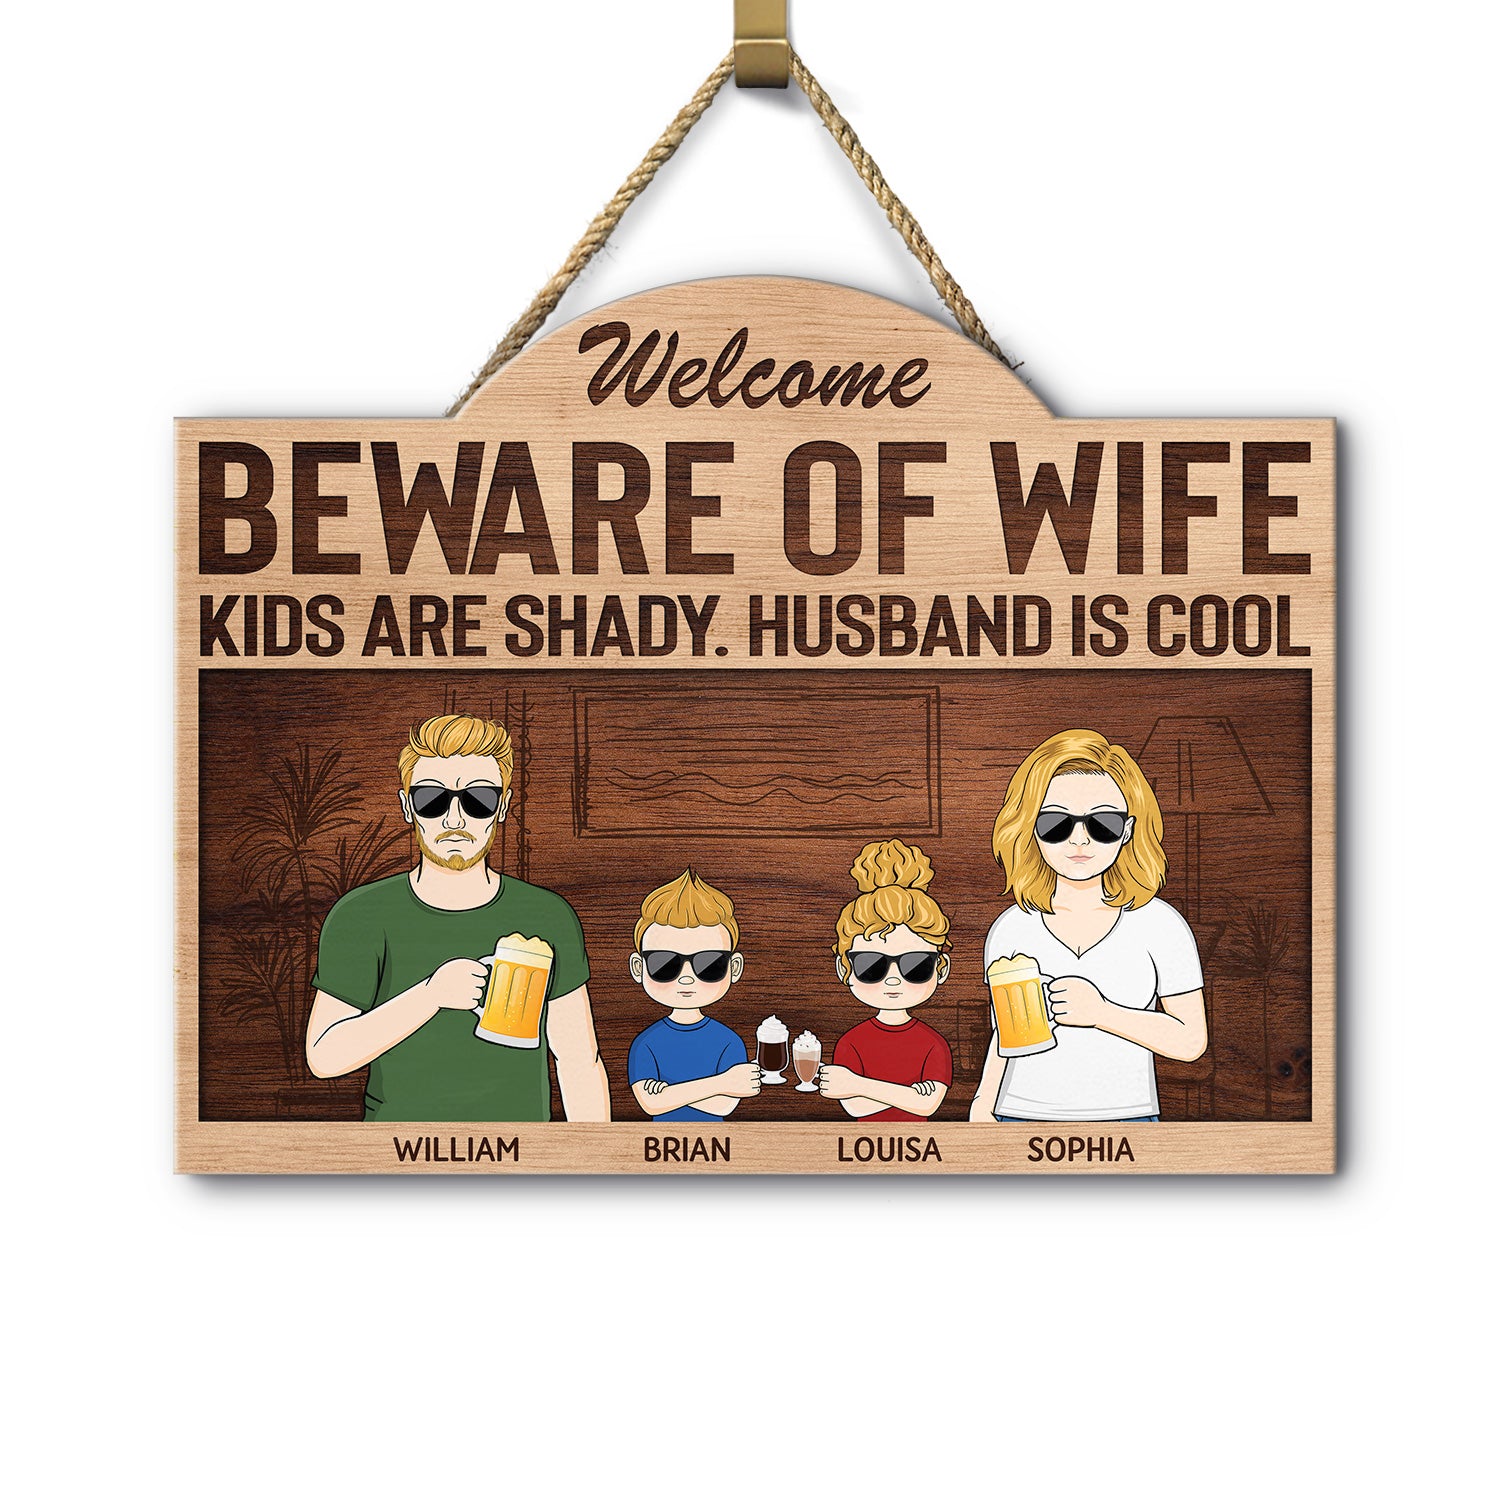 Beware Of Wife Kids Are Shady Husband Is Cool Couple - Anniversary, Birthday, Housewarming Gift For Spouse, Husband, Wife, Family - Personalized Custom Shaped Wood Sign